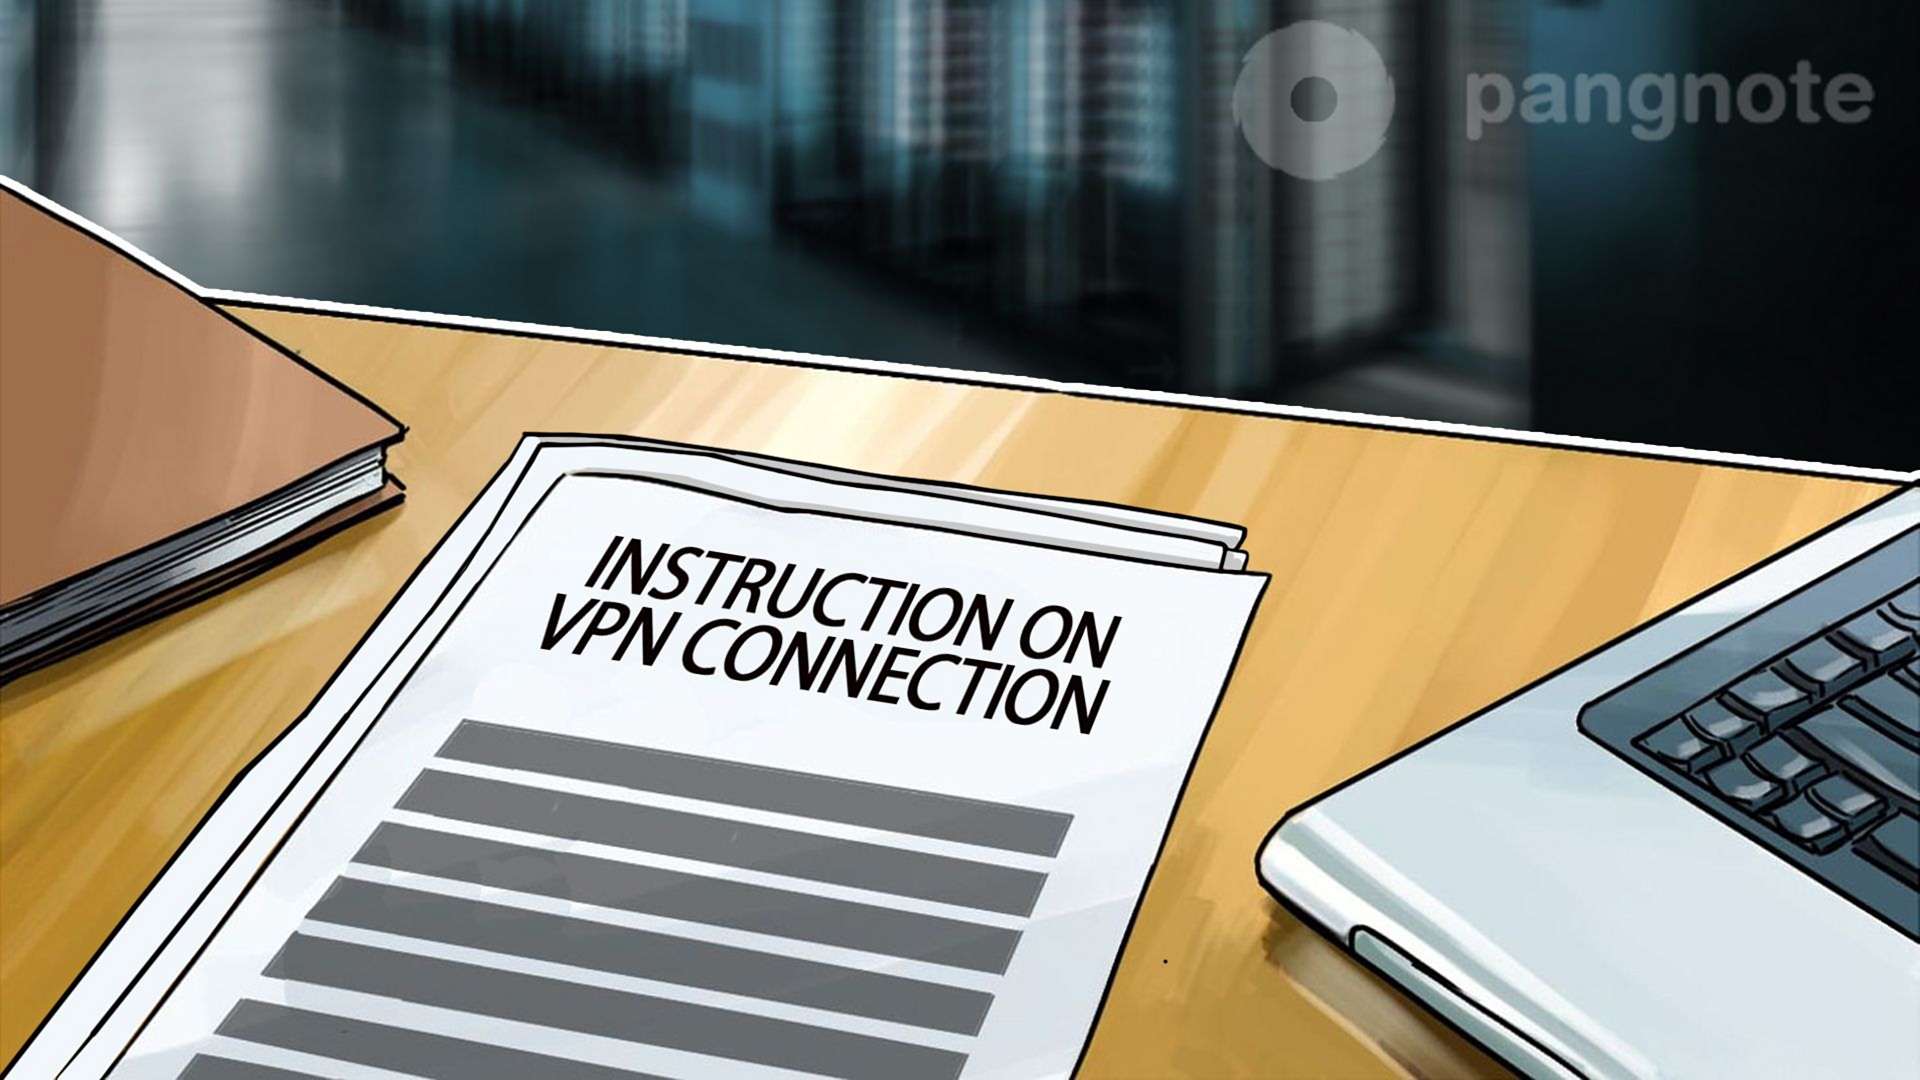 What is freeVPN connection and how to use it?